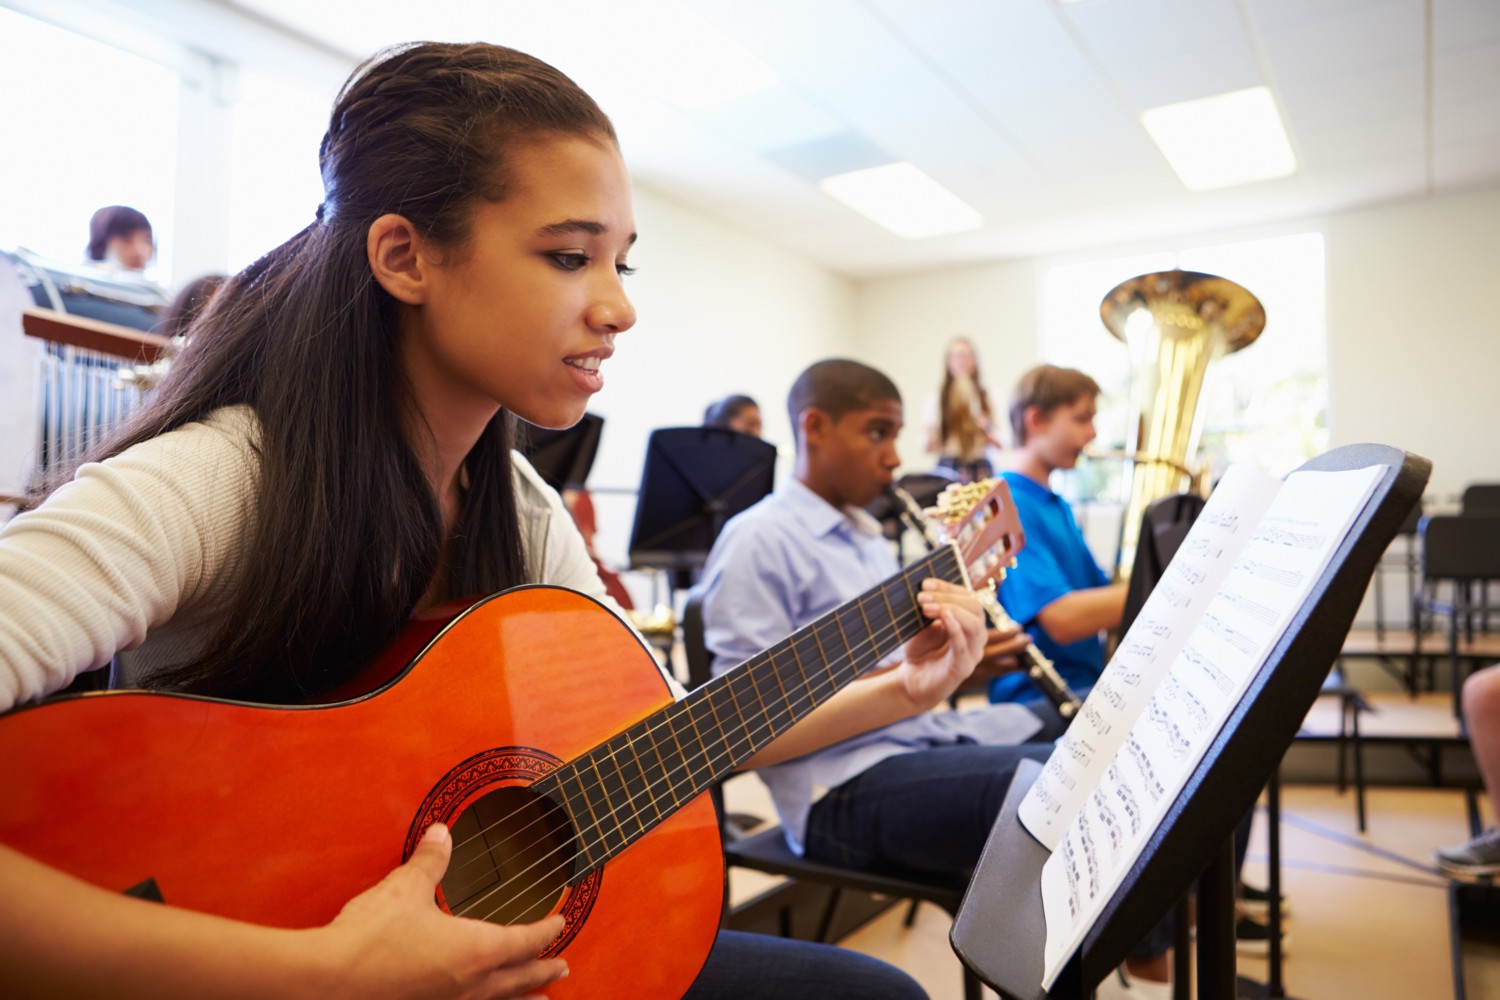 A Student Learning to Play a Small Guitar in a Newly Formed Orchestra at School